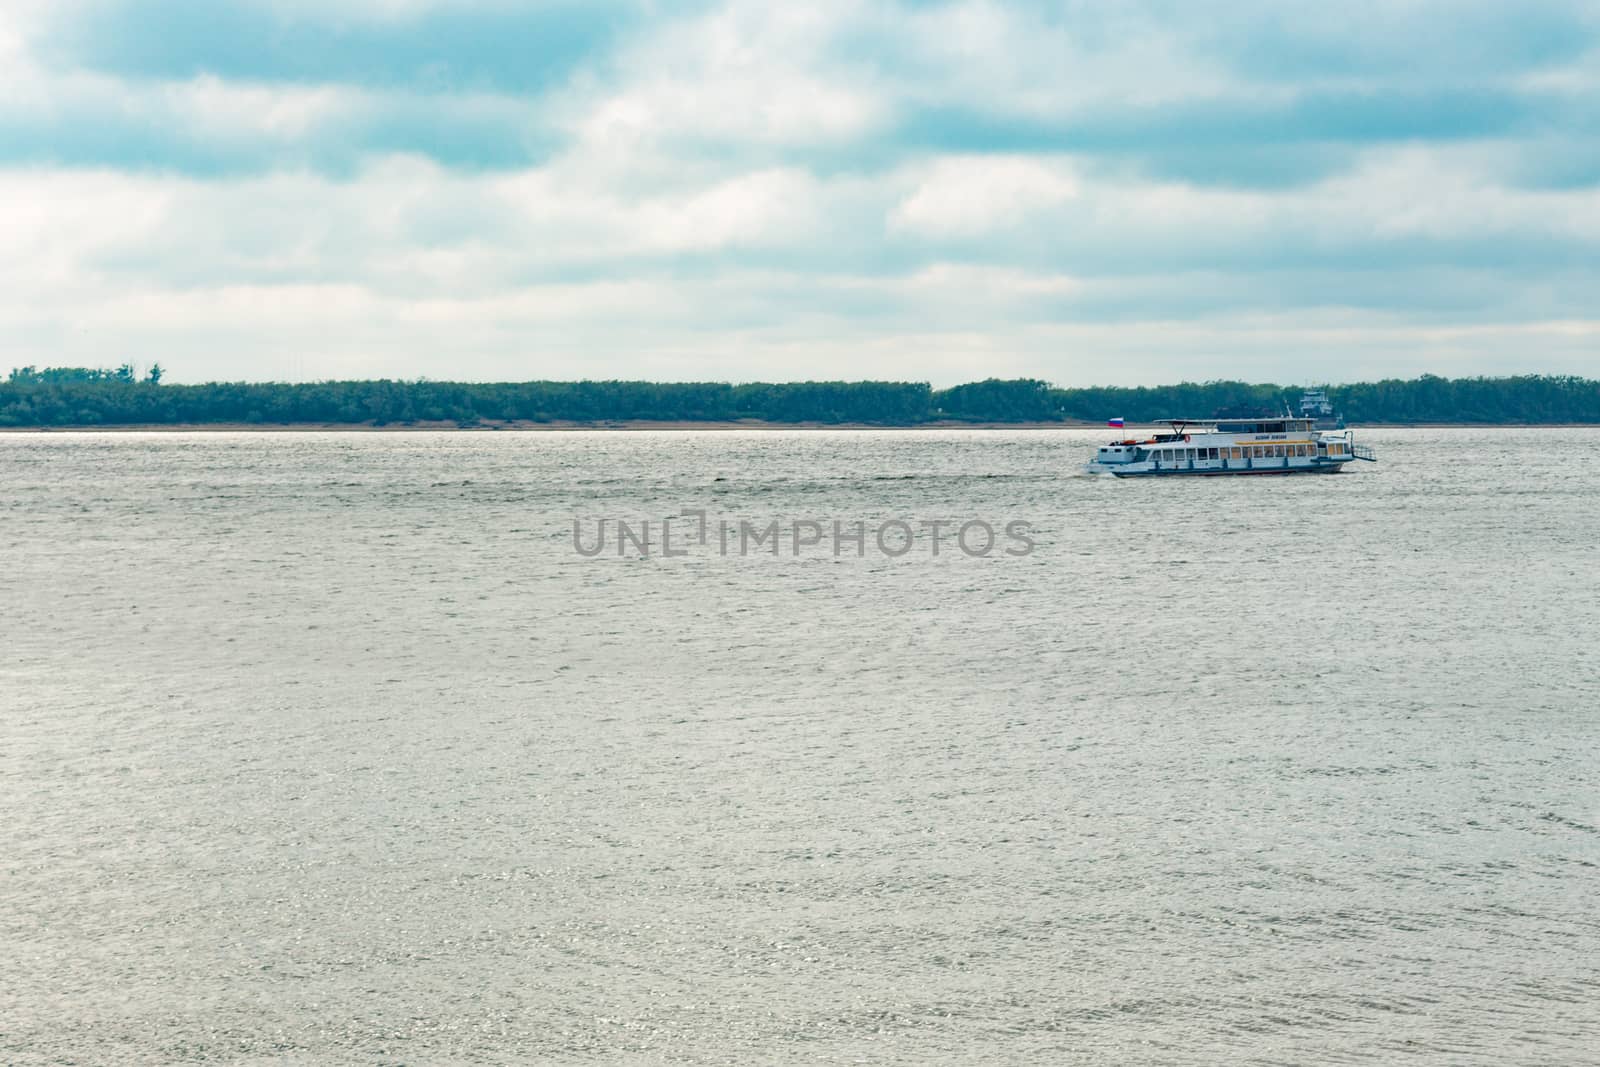 View of the Amur river against the blue sky with white beautiful clouds. Bright spring sun. Russia, Khabarovsk. by rdv27